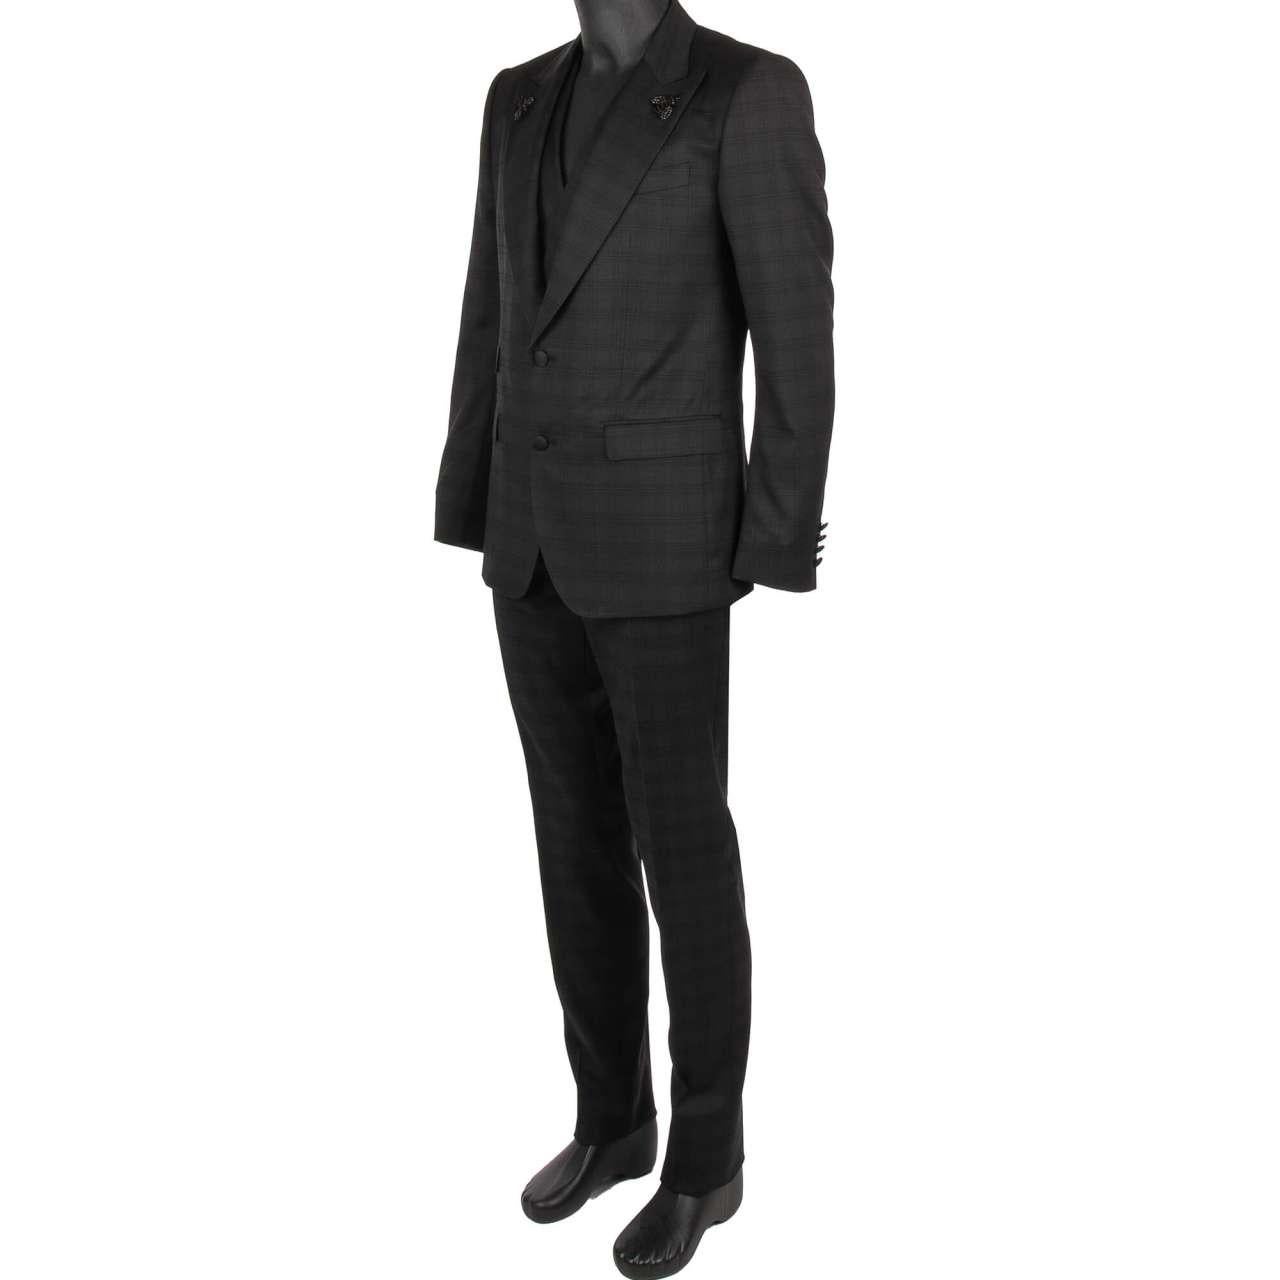 - Virgin wool 3 piece suit, jacket, waistcoat, pants with two crystal bees embroideries in black by DOLCE & GABBANA - SICILIA Model - RUNWAY - Dolce & Gabbana Fashion Show - New with tag - Former RRP: EUR 2,750 - MADE in ITALY - Slim Fit - Model: